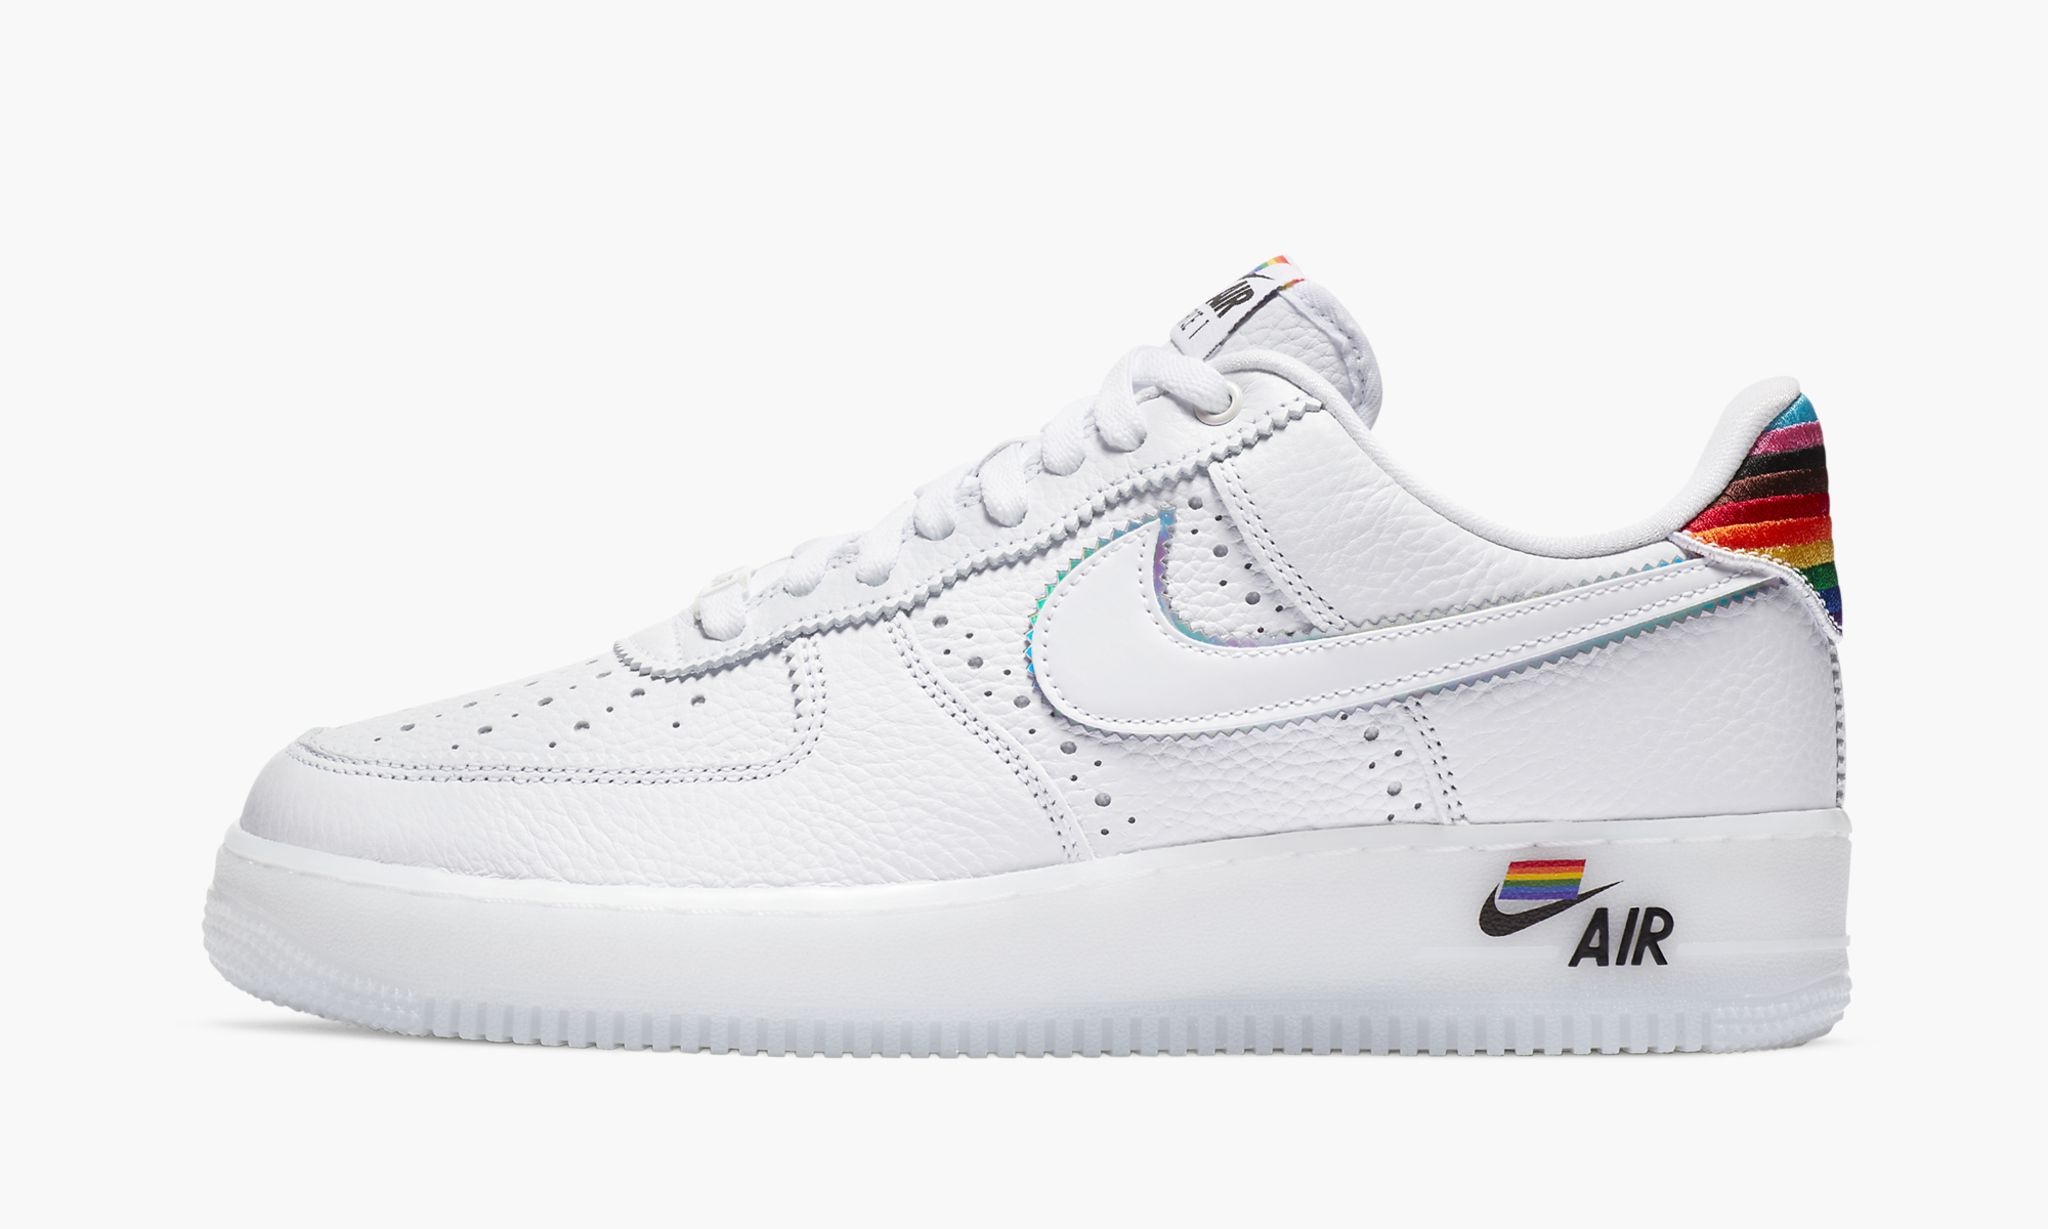 Air Force 1 Low "Be True 2020" - 1